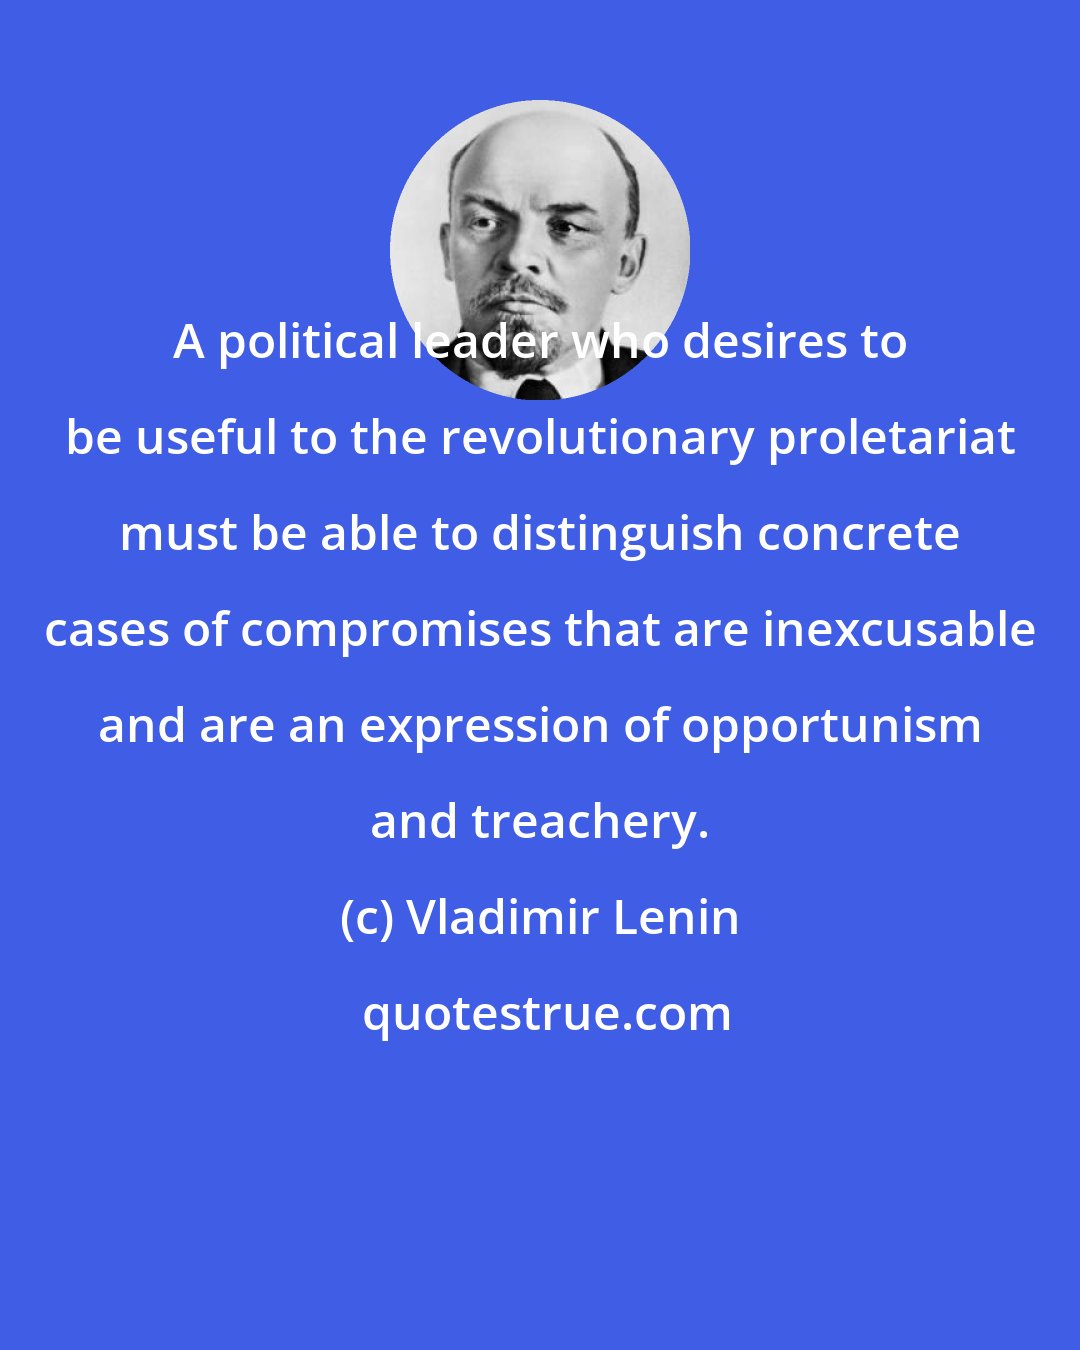 Vladimir Lenin: A political leader who desires to be useful to the revolutionary proletariat must be able to distinguish concrete cases of compromises that are inexcusable and are an expression of opportunism and treachery.